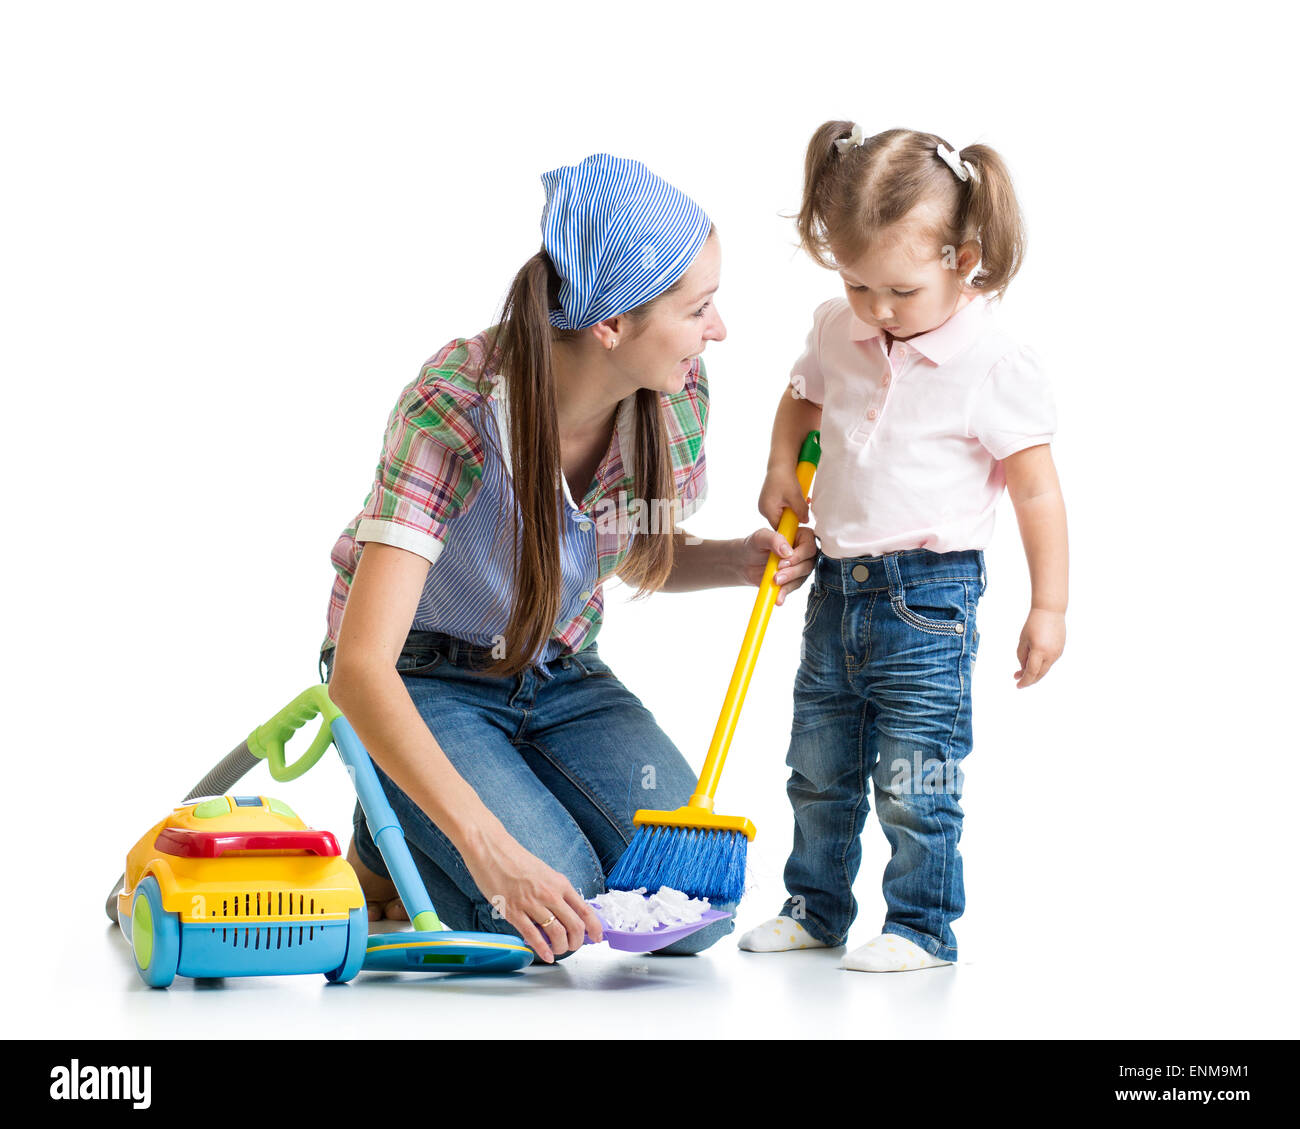 Little girl and mom cleaning room isolated Stock Photo